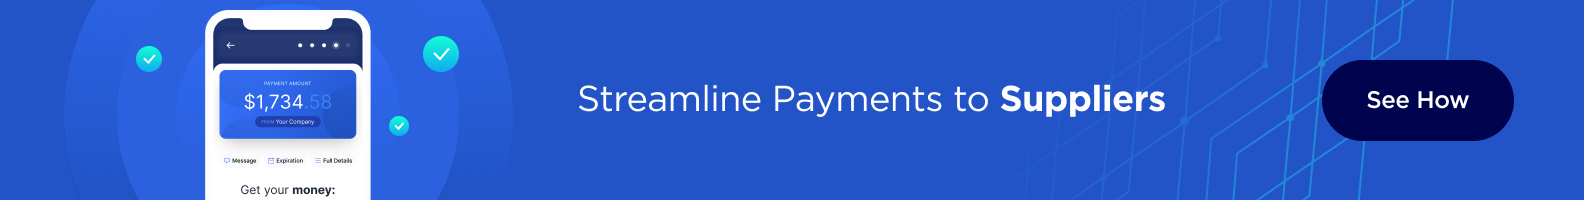 Streamline Payments to Suppliers